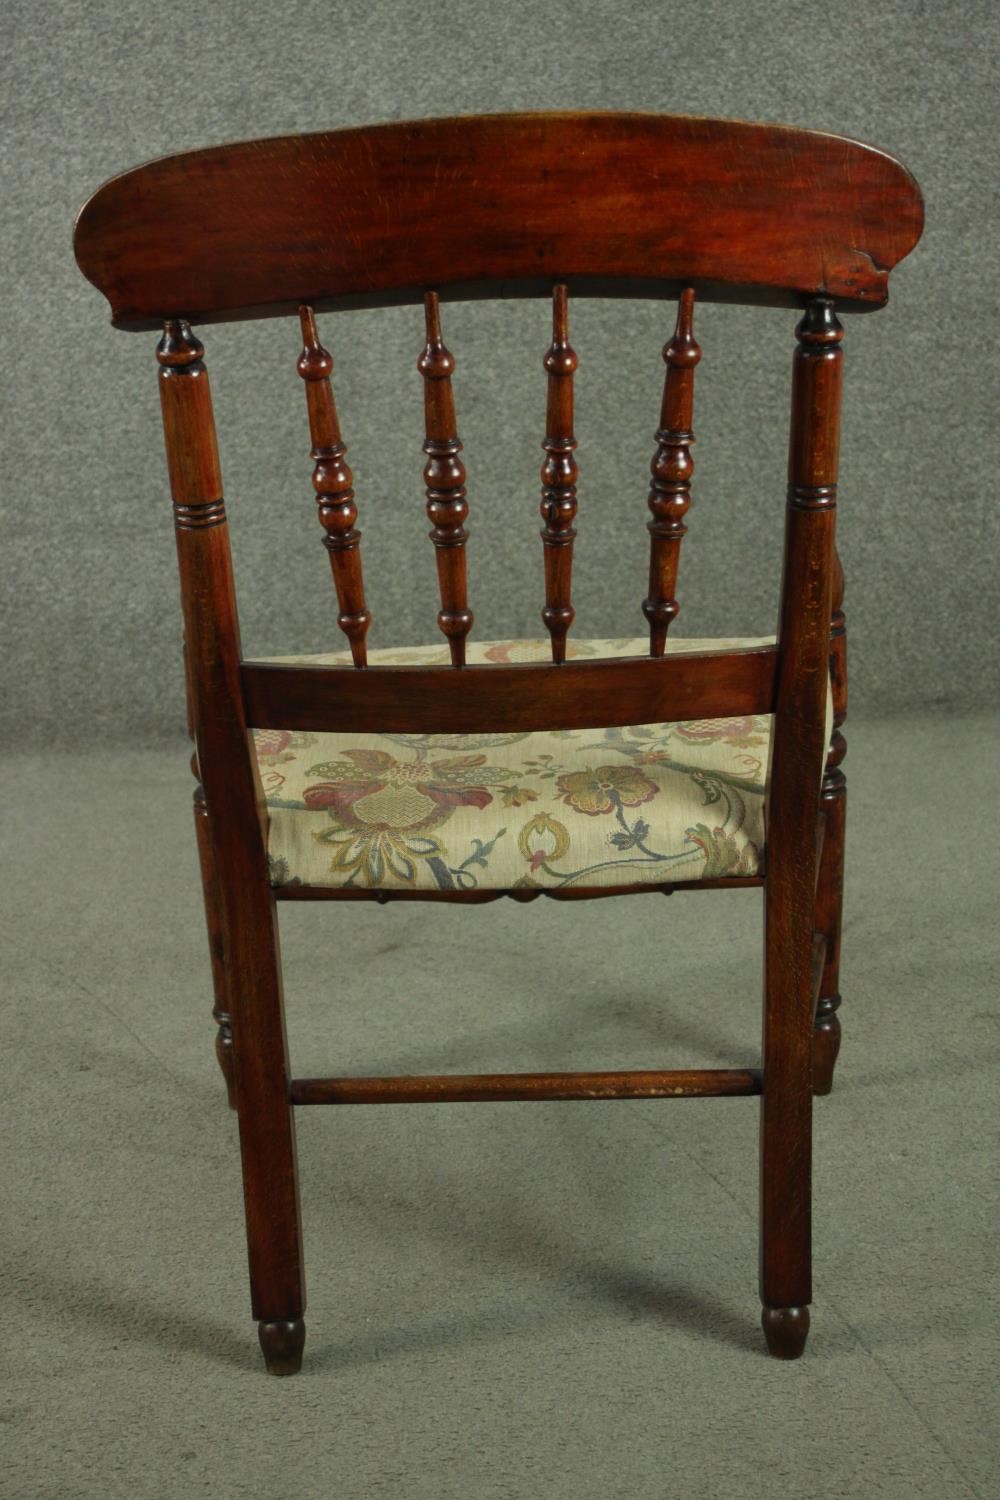 A rustic stained beech bar back open armchair, with turned spindles over a tapestry style seat, on - Image 5 of 7